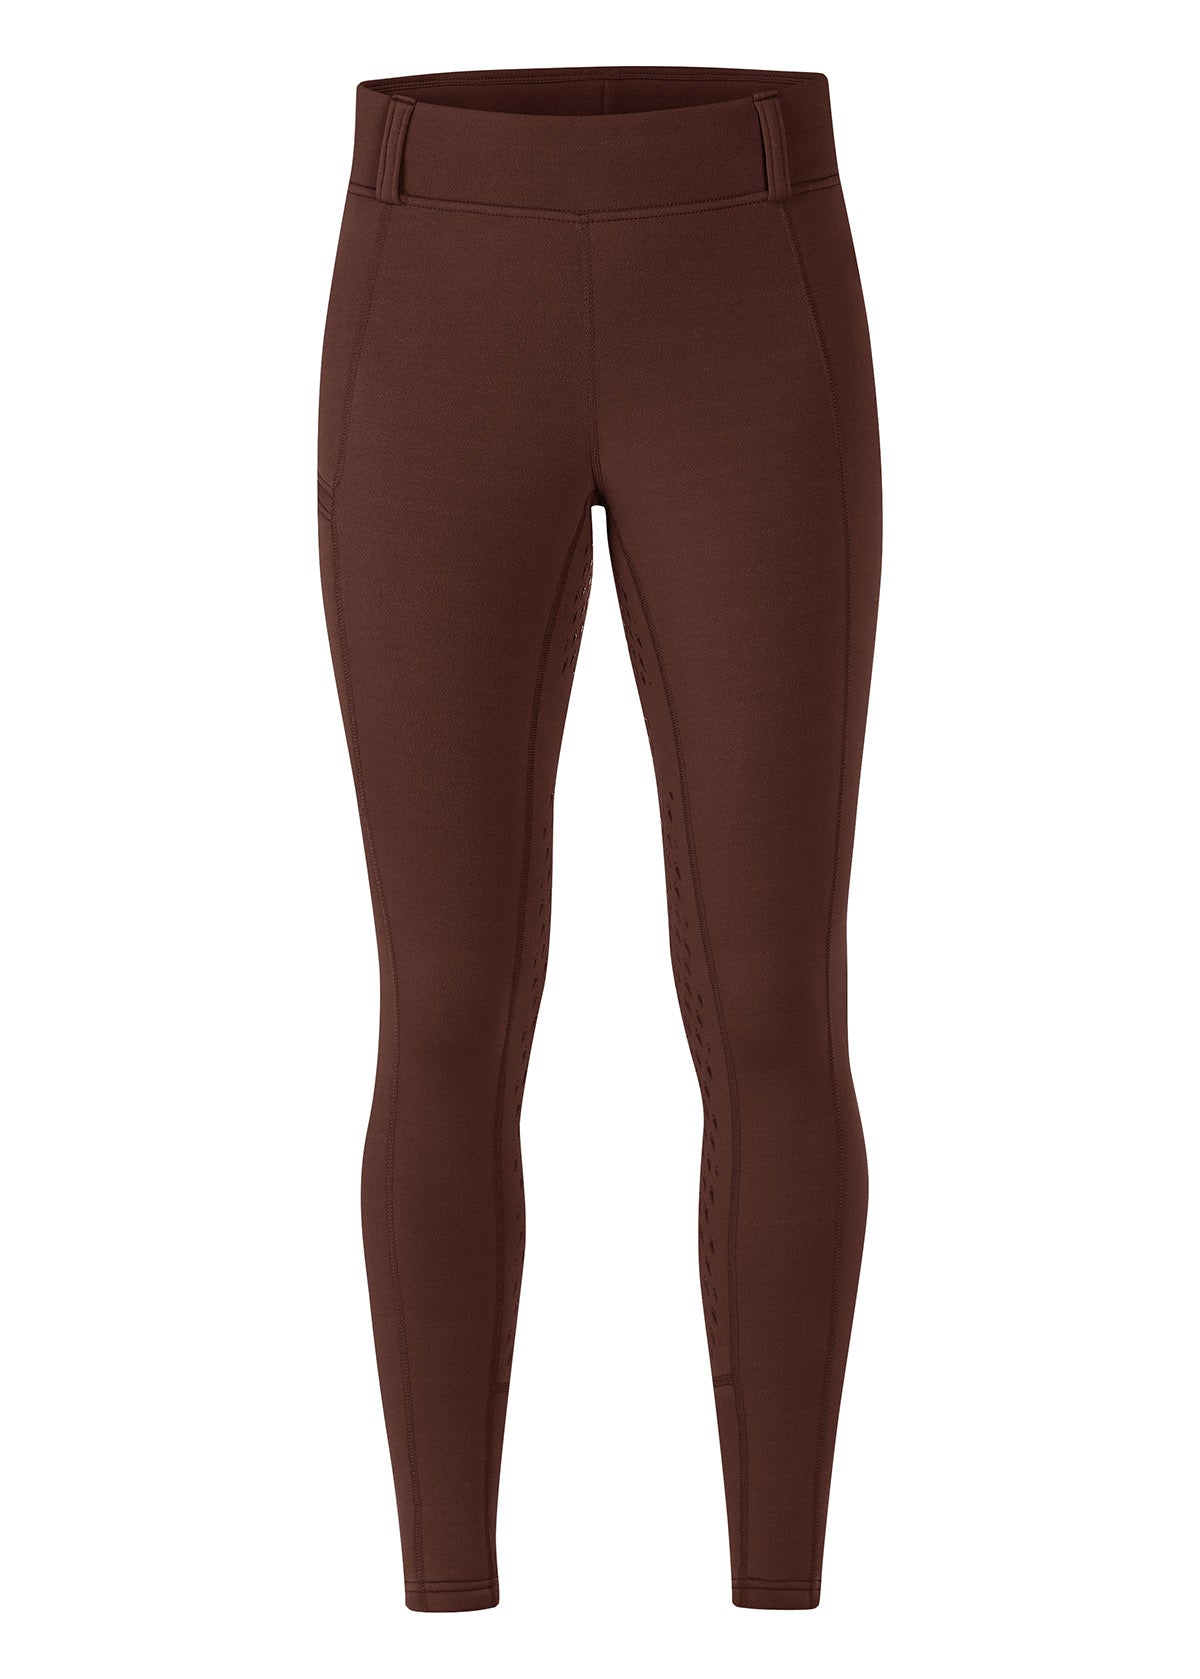 Kerrits Powerstretch Pocket Tights II Review – The Comfy Horse Company –  Brace Yourself